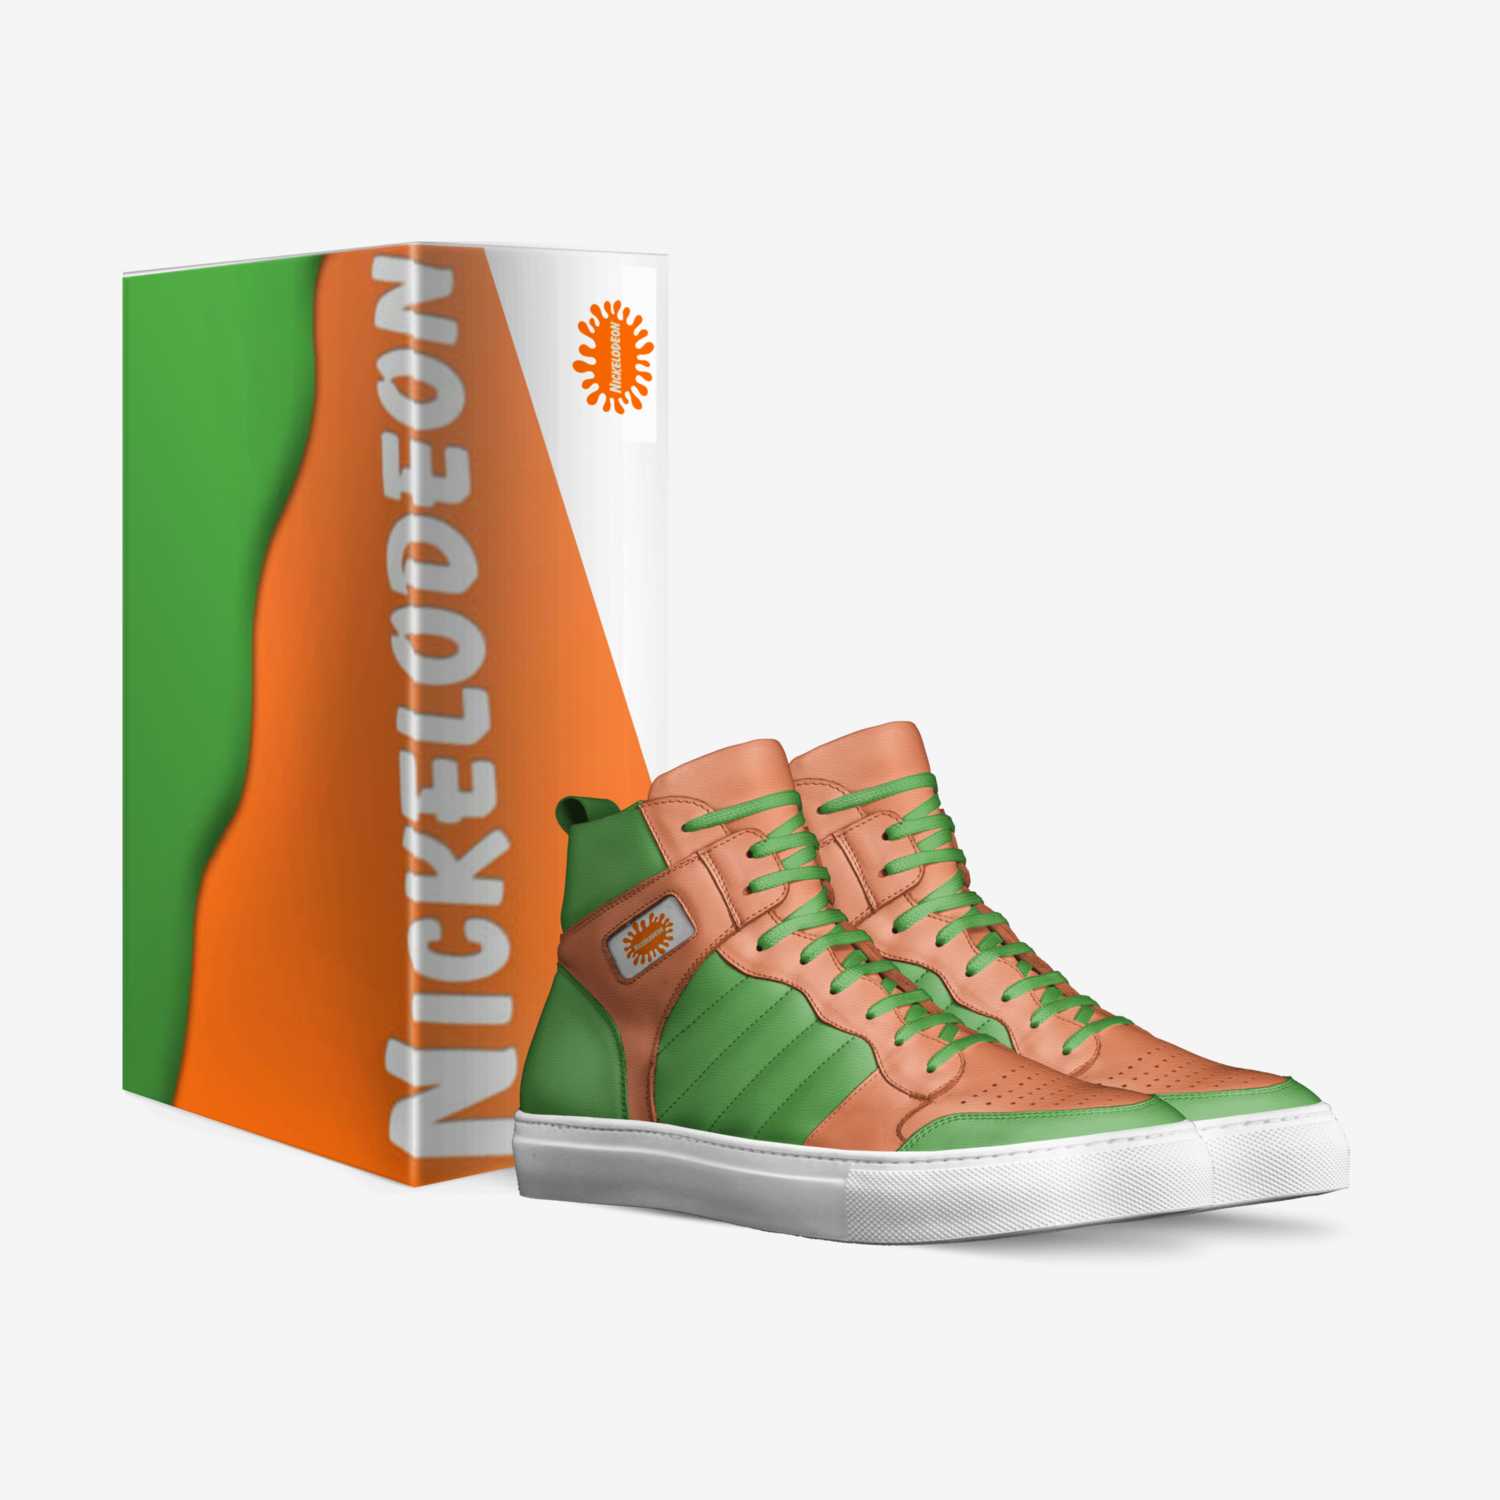 Nickelodean custom made in Italy shoes by Vinh Du | Box view